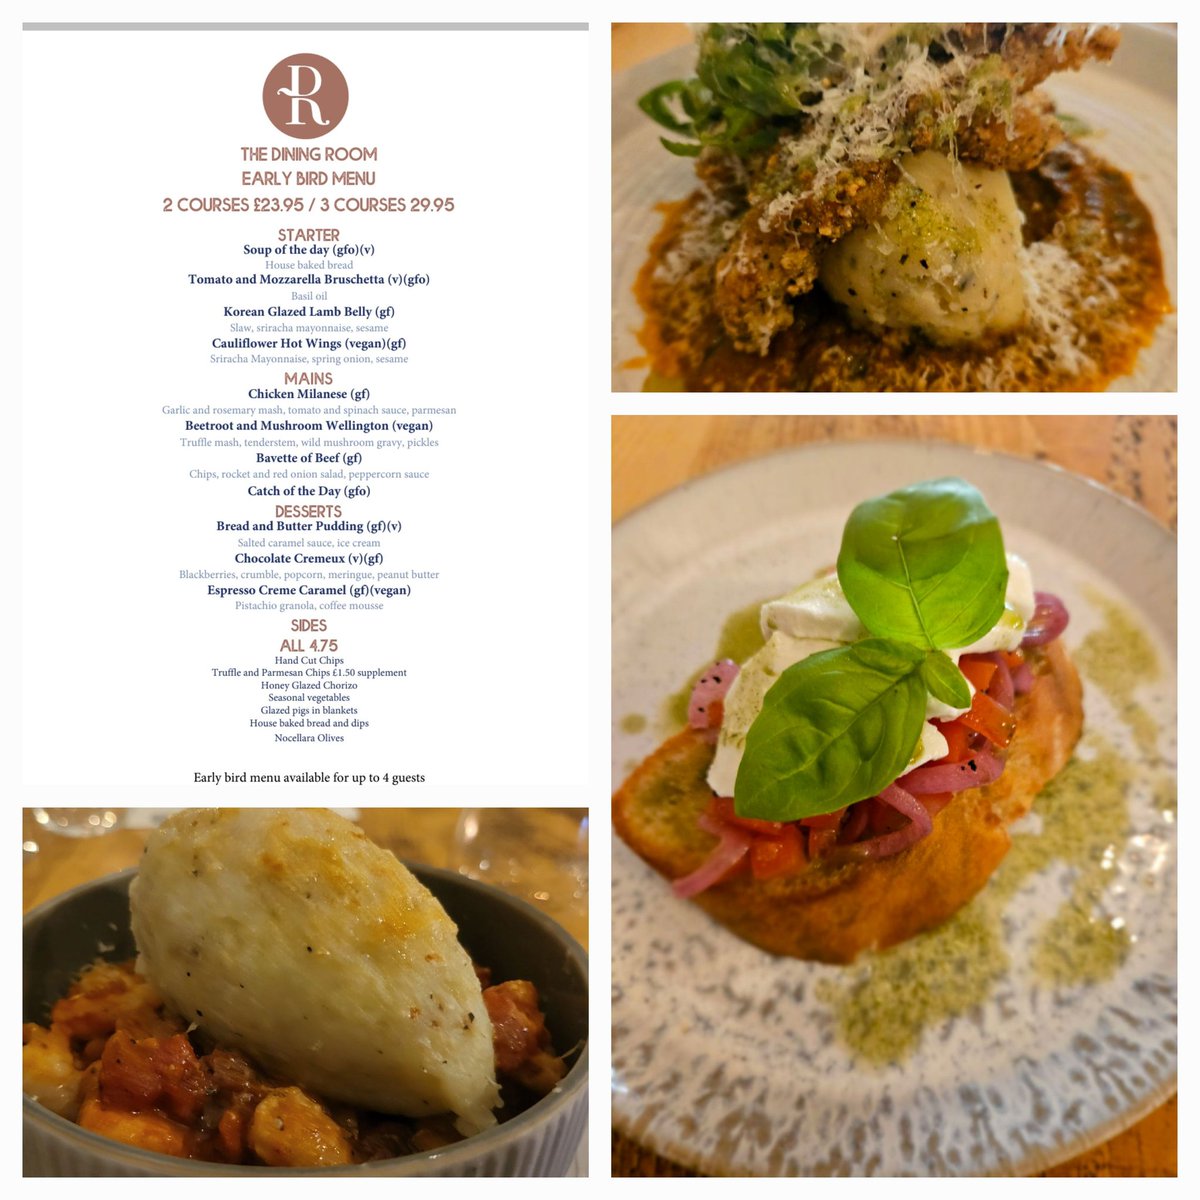 Come in and try our new early bird menu. Available Wednesday-Saturday, last bookings 6pm upto guests. Book on resdiary.com/restaurant/the…  #derbyshire #glutenfriendly #supportlocal #glutenfree #foodanddrink #foodie #offers #derby #restaurant #earlybirdoffer #pretheatredining #eating